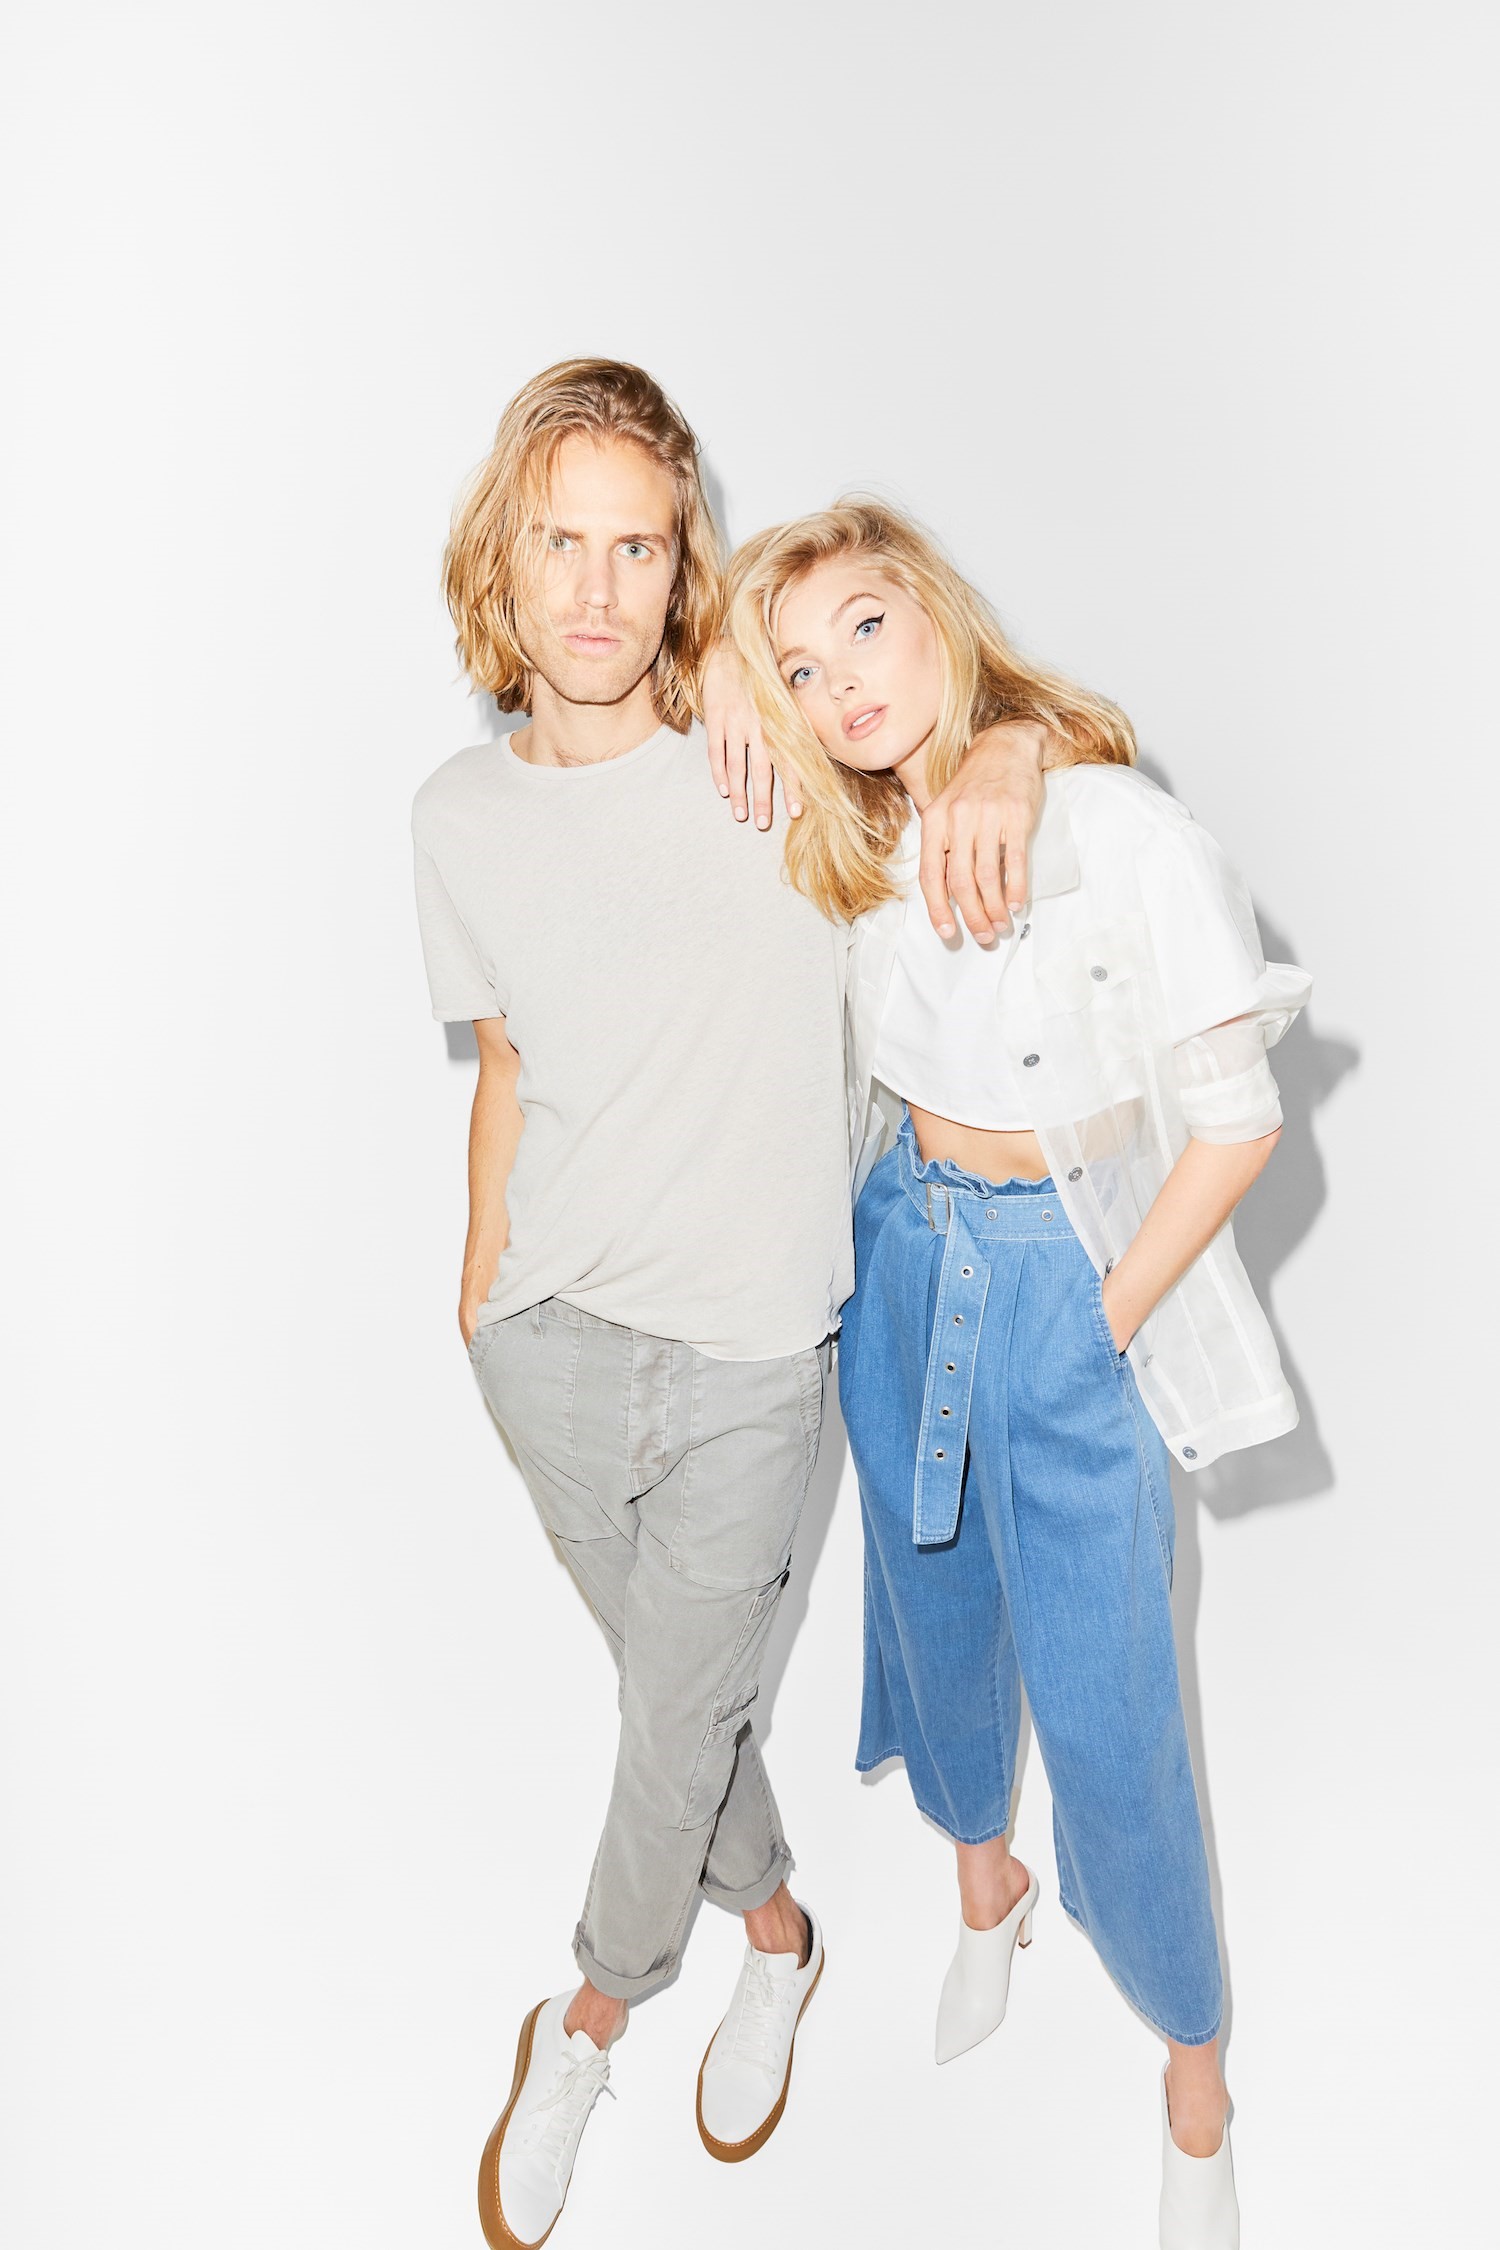 J Brand taps another IRL couple for campaign